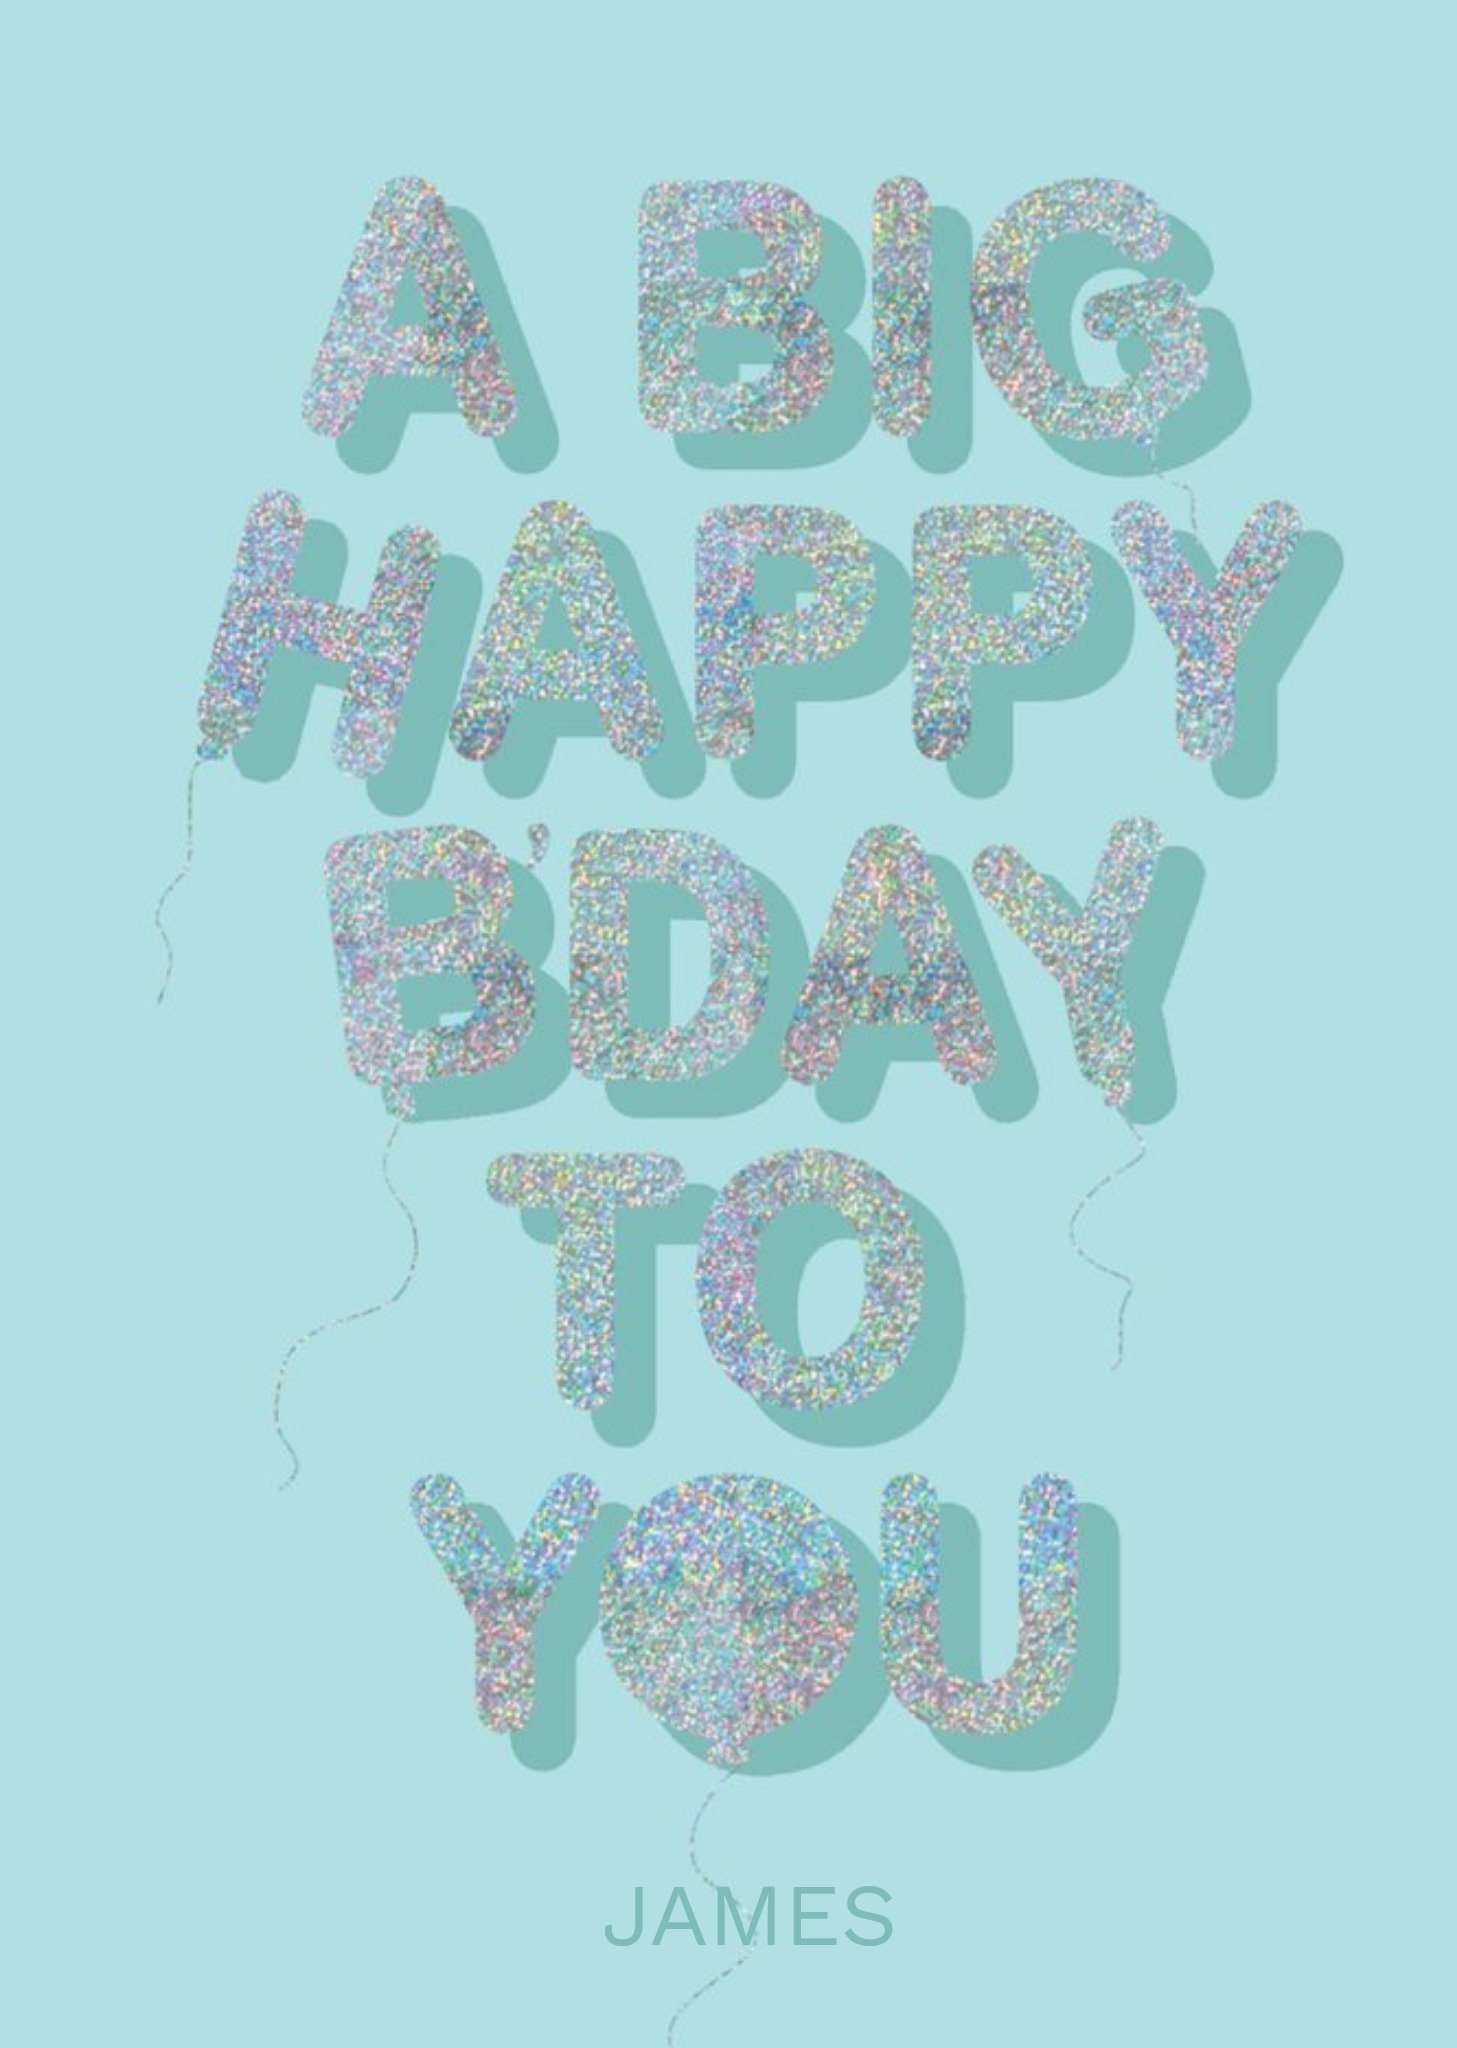 Moonpig Glittery Balloon Typography On A Blue Background Birthday Card, Large